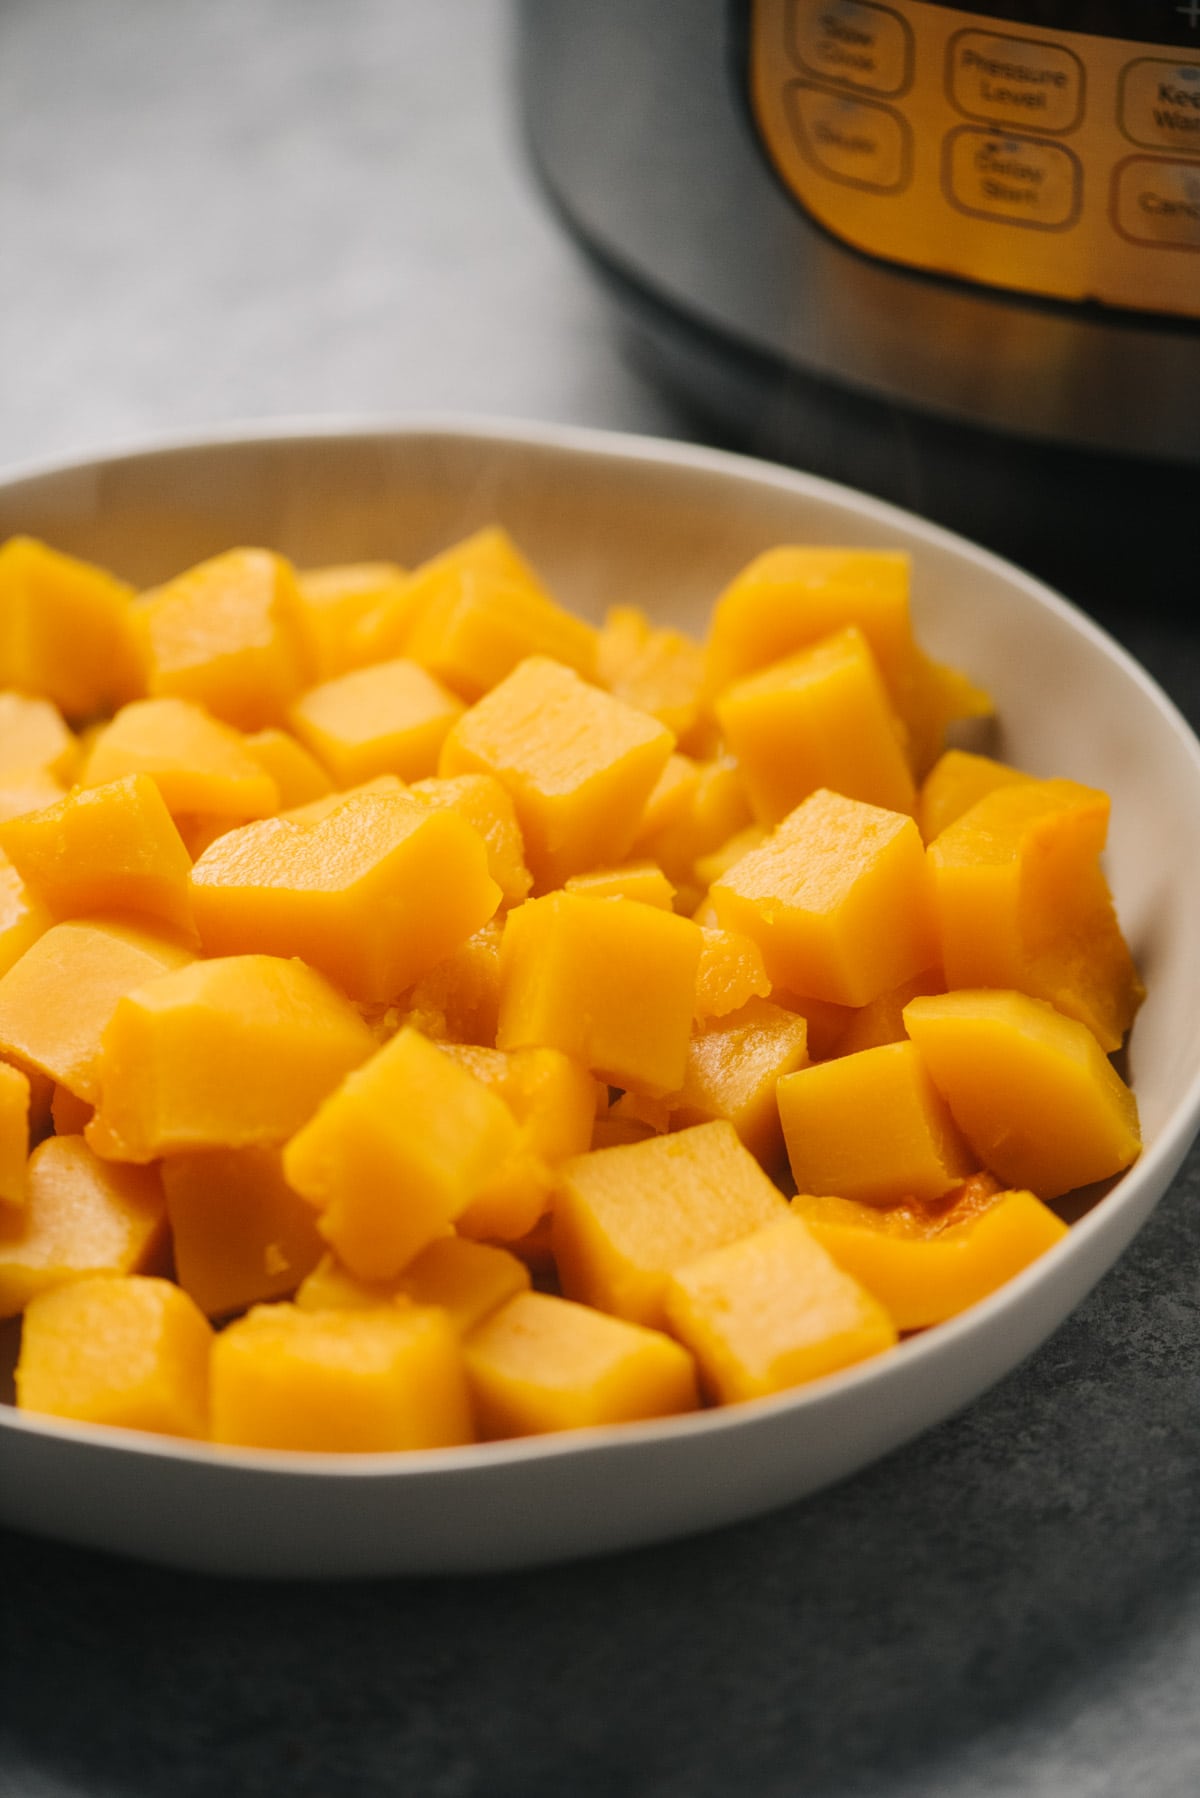 A bowl of steamed butternut squash cubes steamed in the instant pot on a concrete table with a pressure cooker in the background.